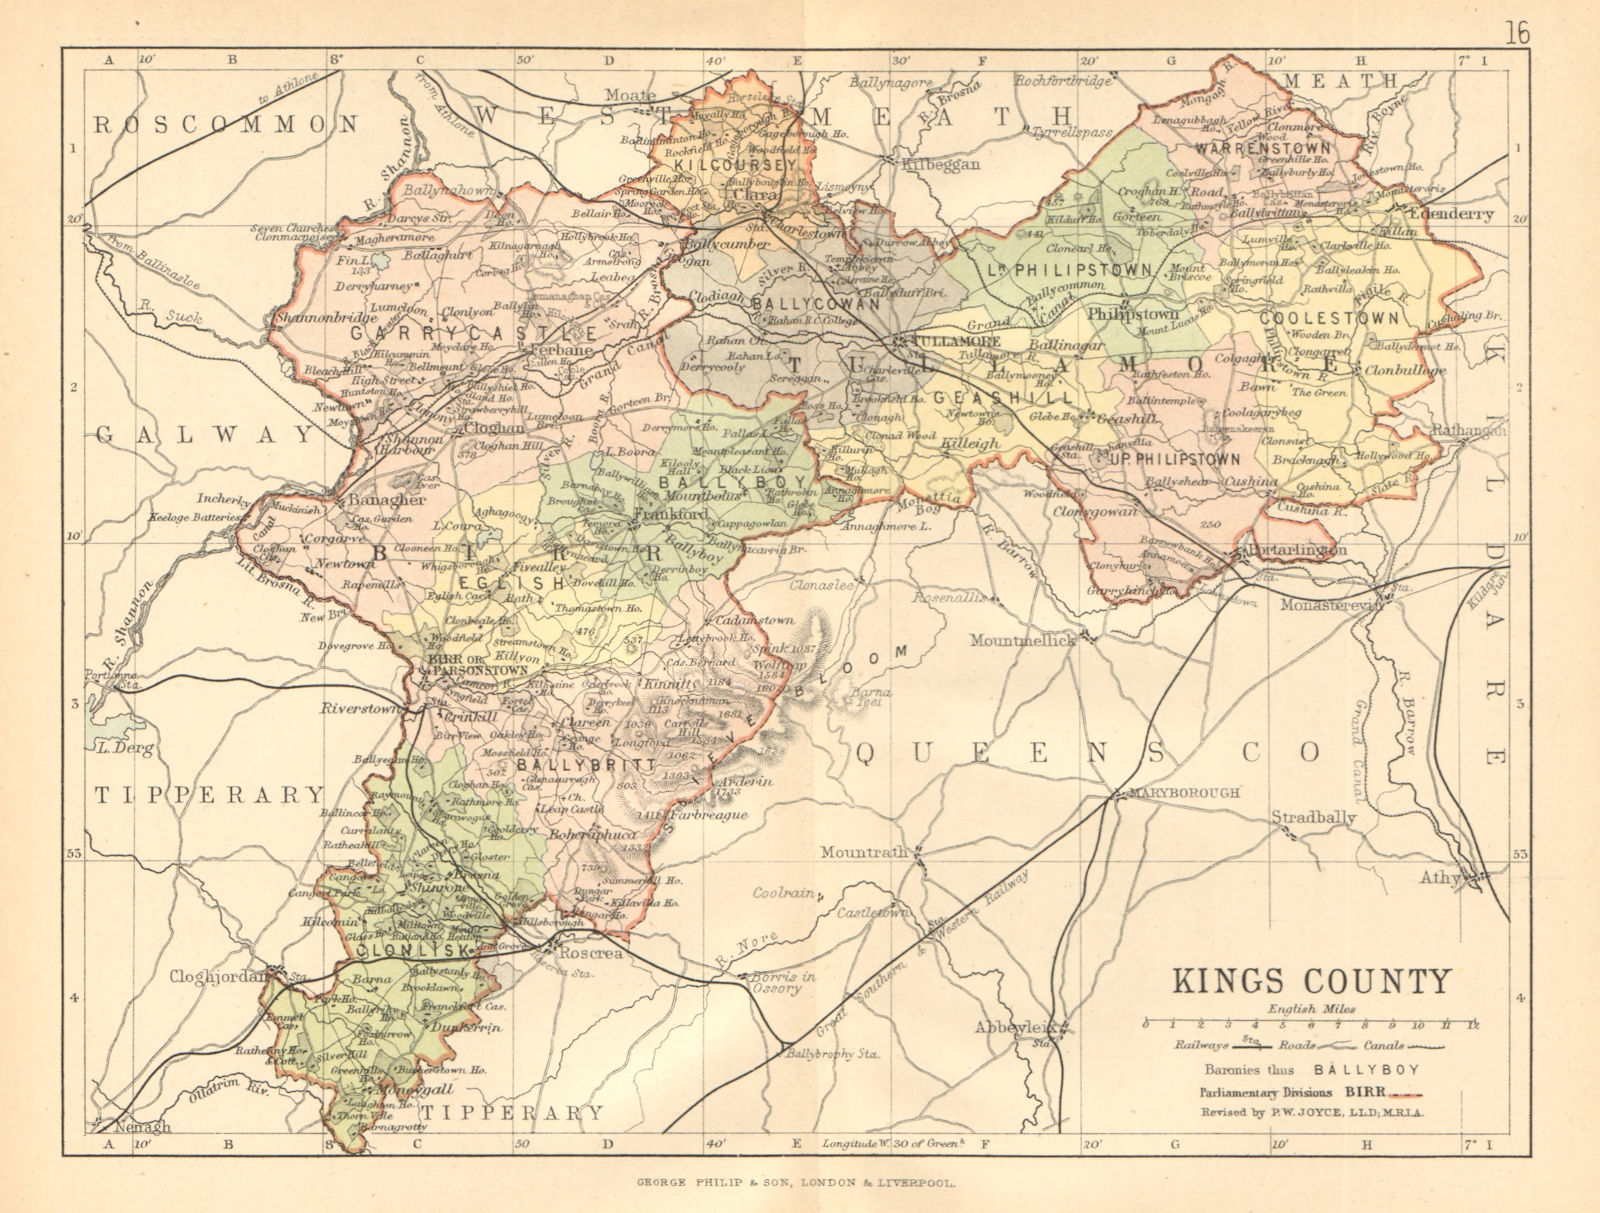 KINGS COUNTY (OFFALY) . Antique county map. Leinster. Ireland. BARTHOLOMEW c1902